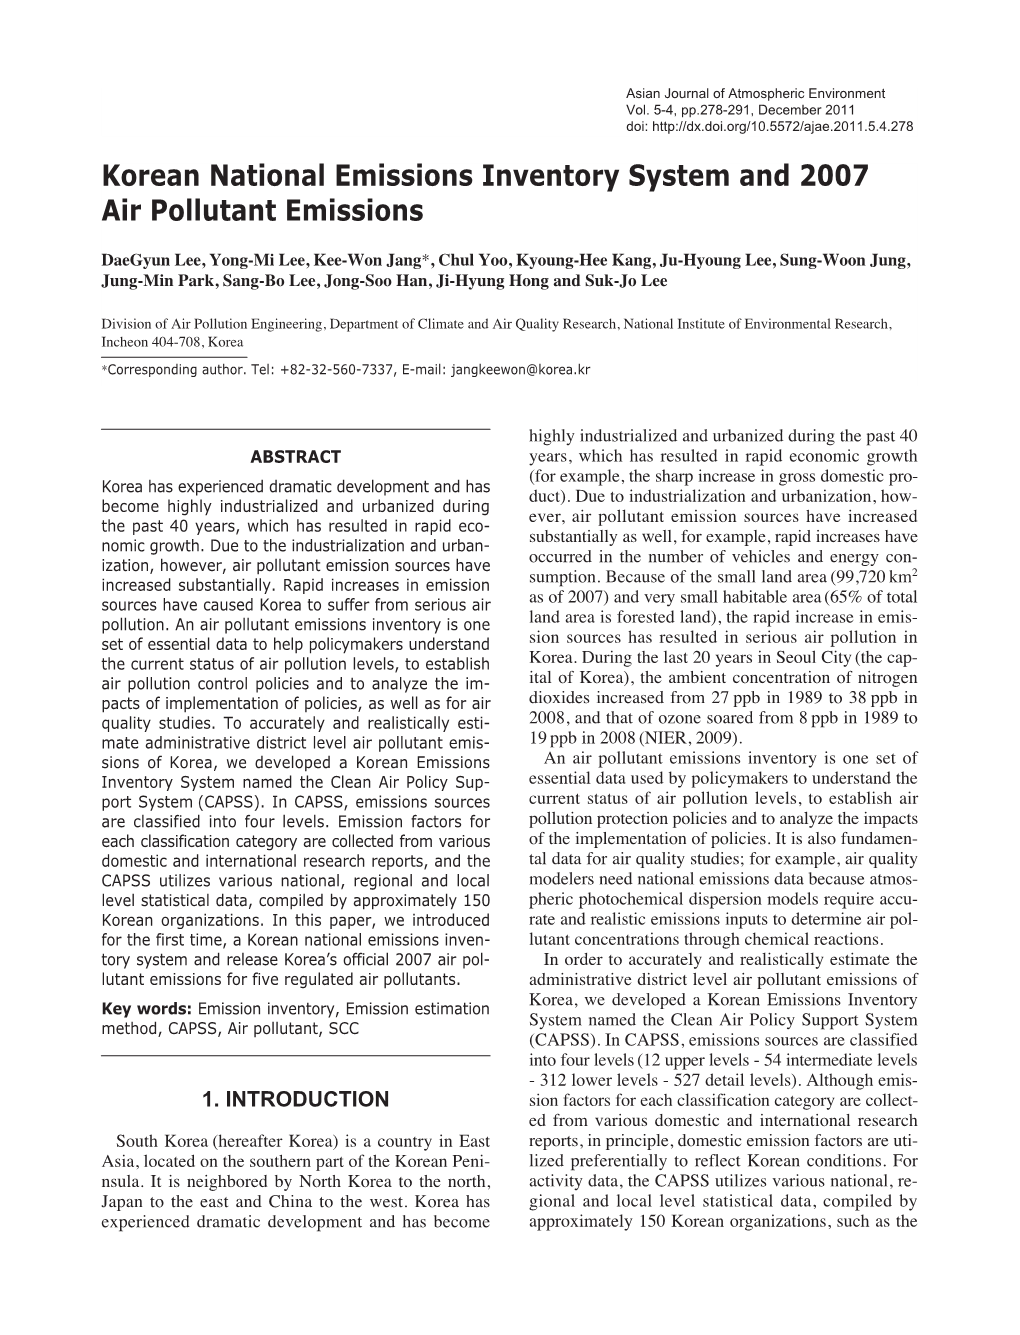 Korean National Emissions Inventory System and 2007 Air Pollutant Emissions